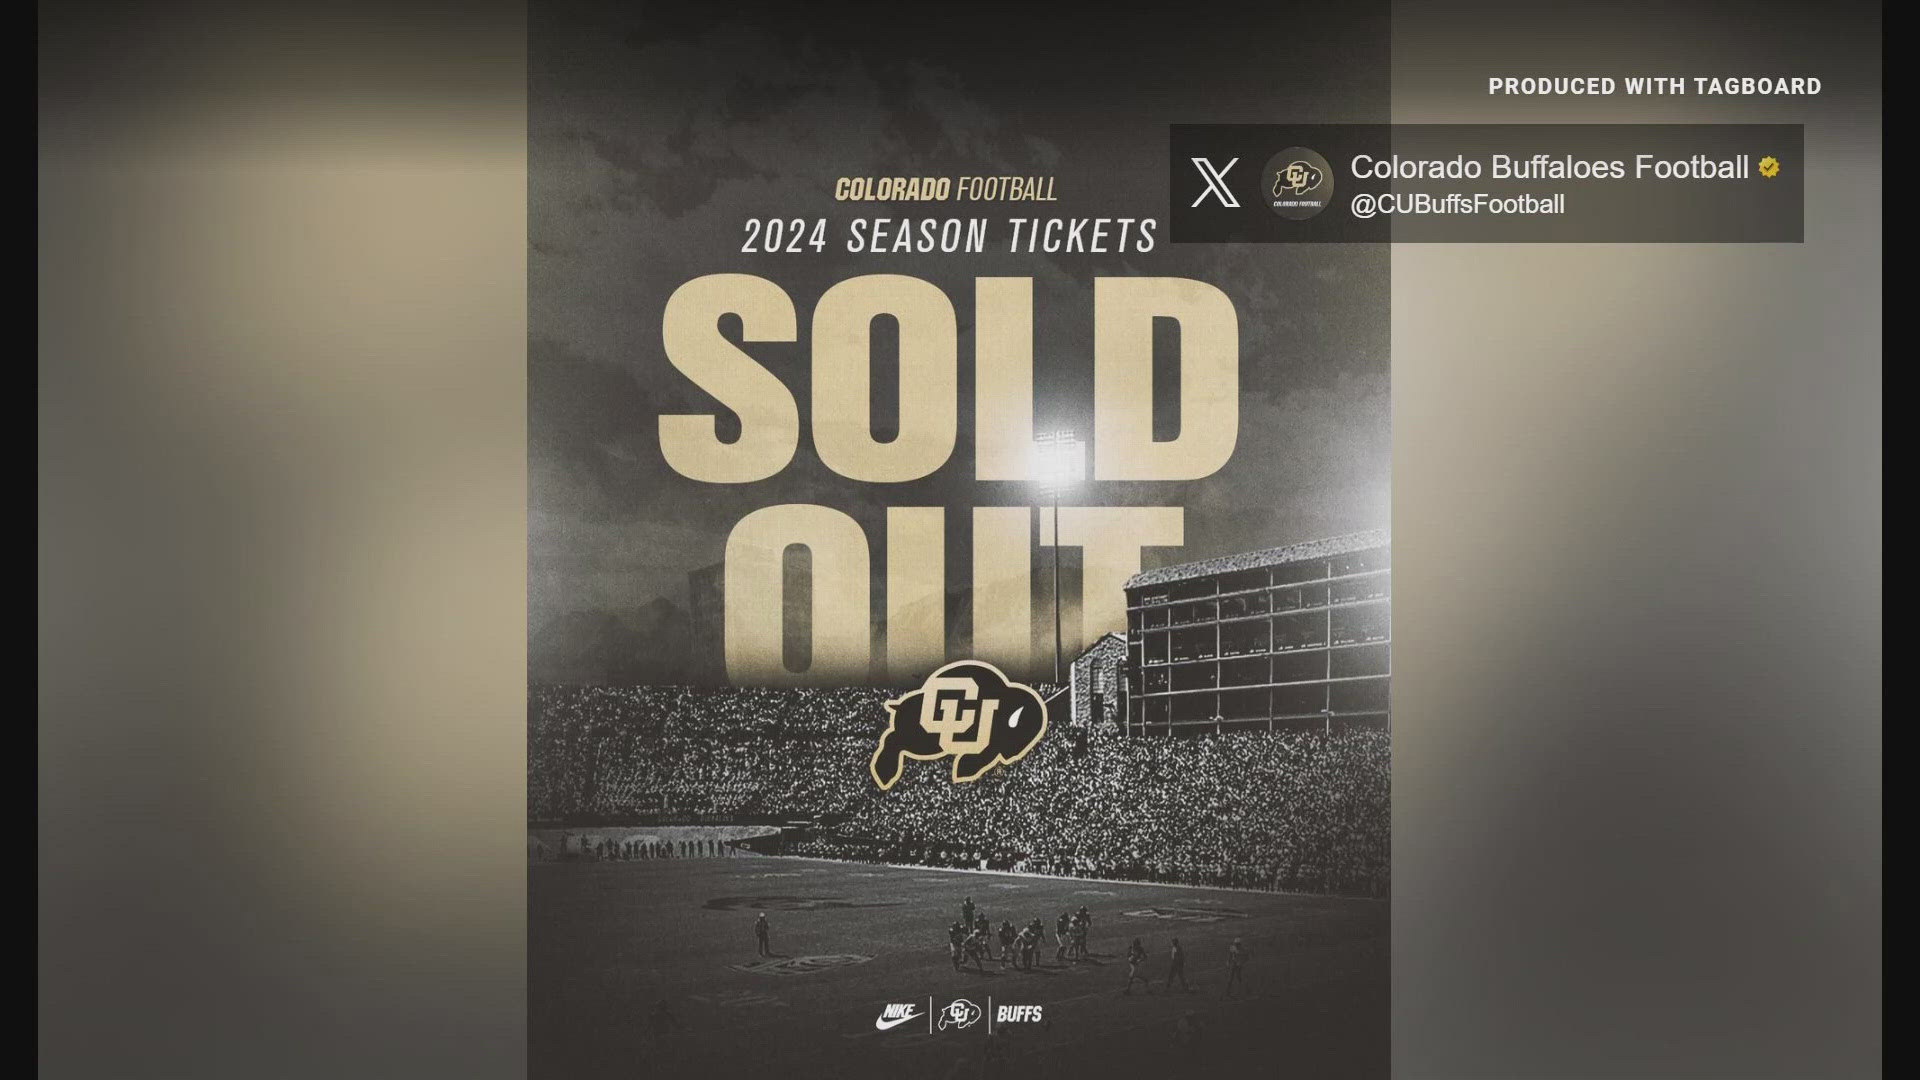 Colorado's season ticket renewal rate finished above 98% for a second-consecutive season under head coach Deion Sanders.